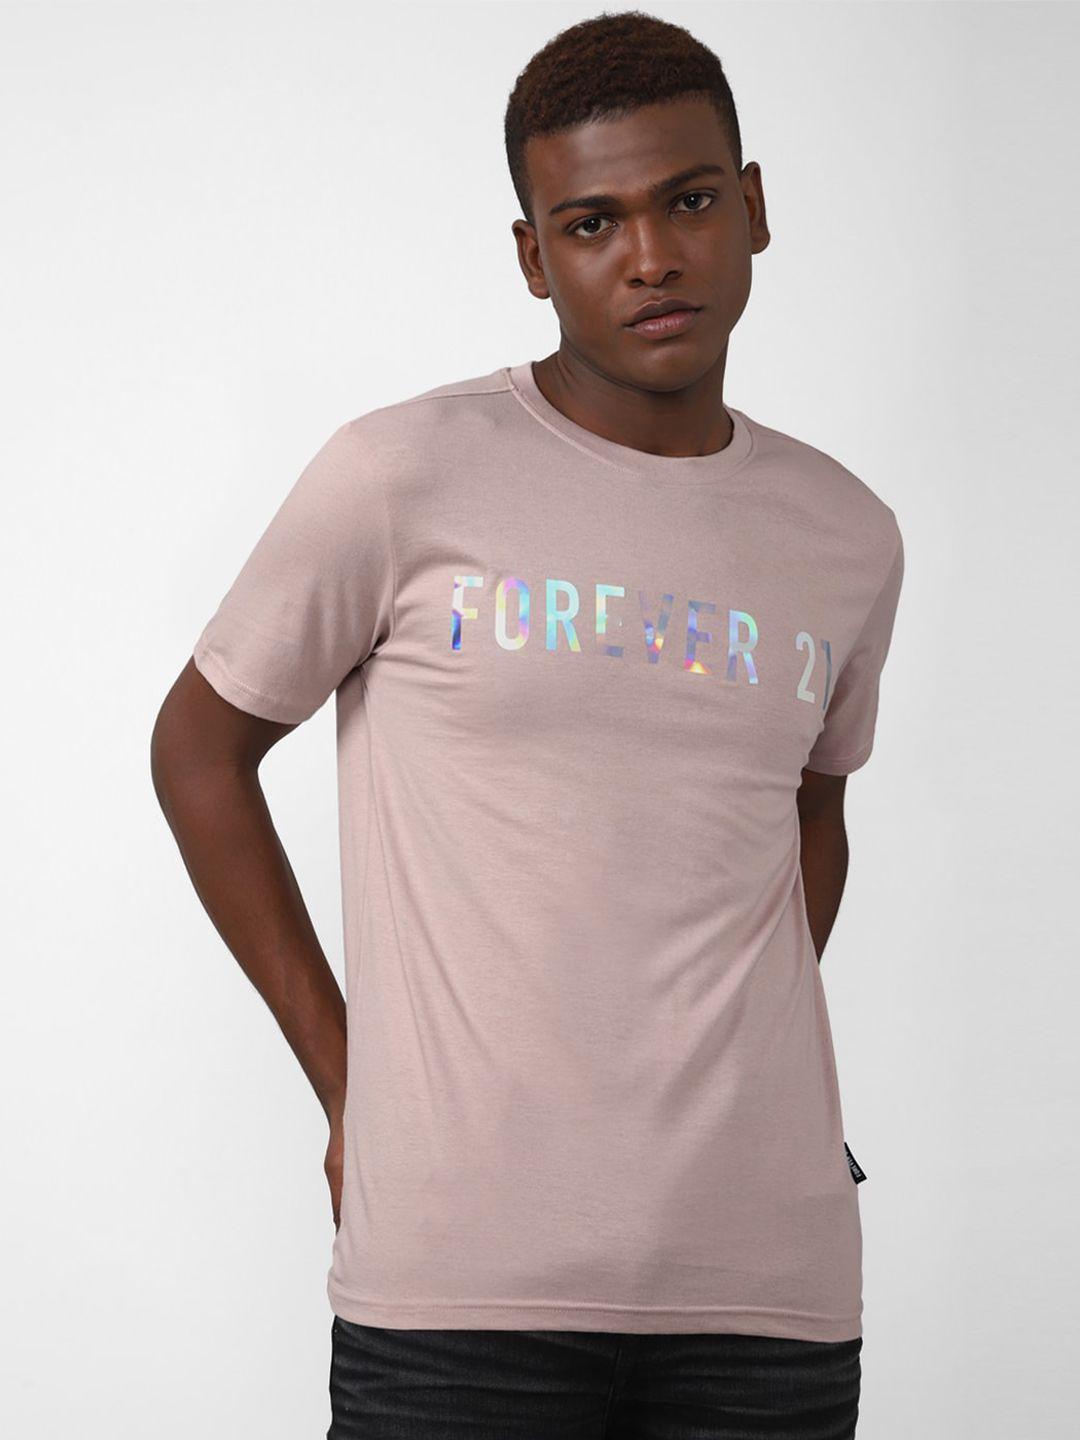 forever-21-men-pink-typography-pure-cotton-printed-t-shirt